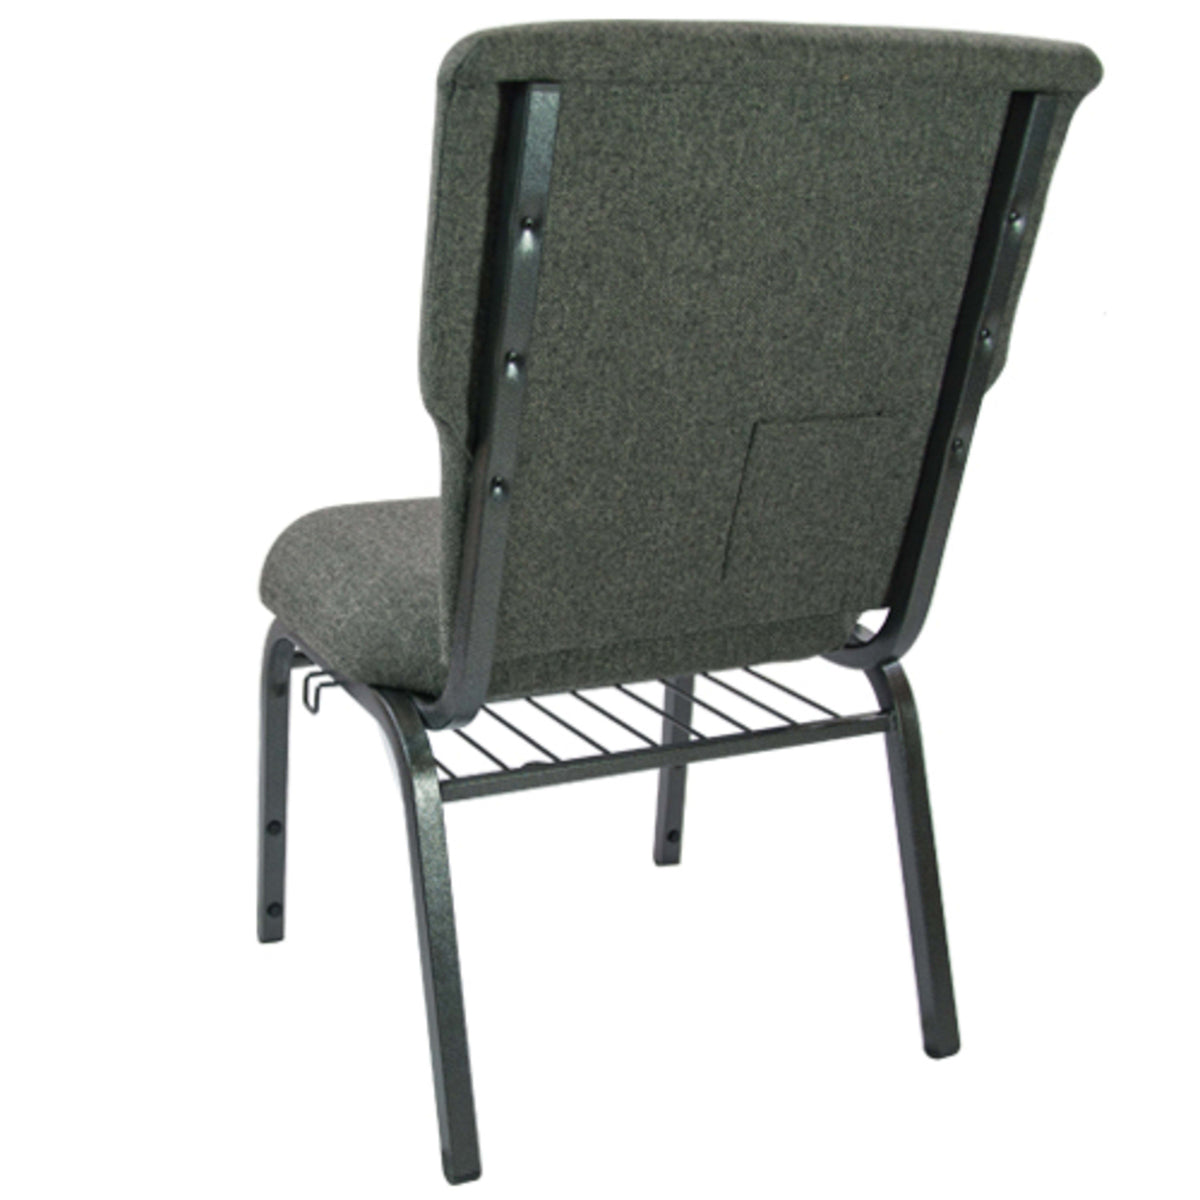 Charcoal Gray Fabric/Silver Vein Frame |#| Charcoal Gray Discount Church Chair - 21 in. Wide